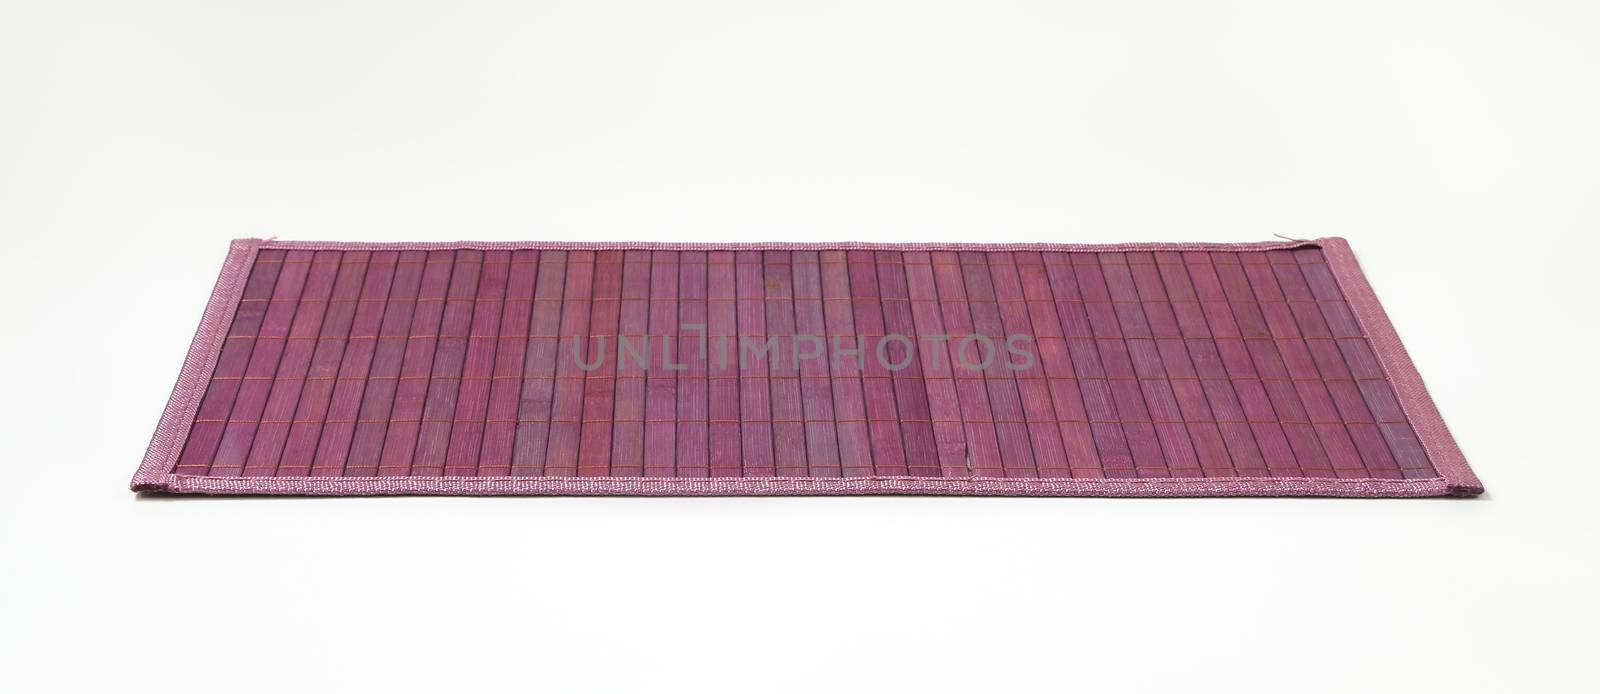 Stylish violet bamboo placemat - fully open